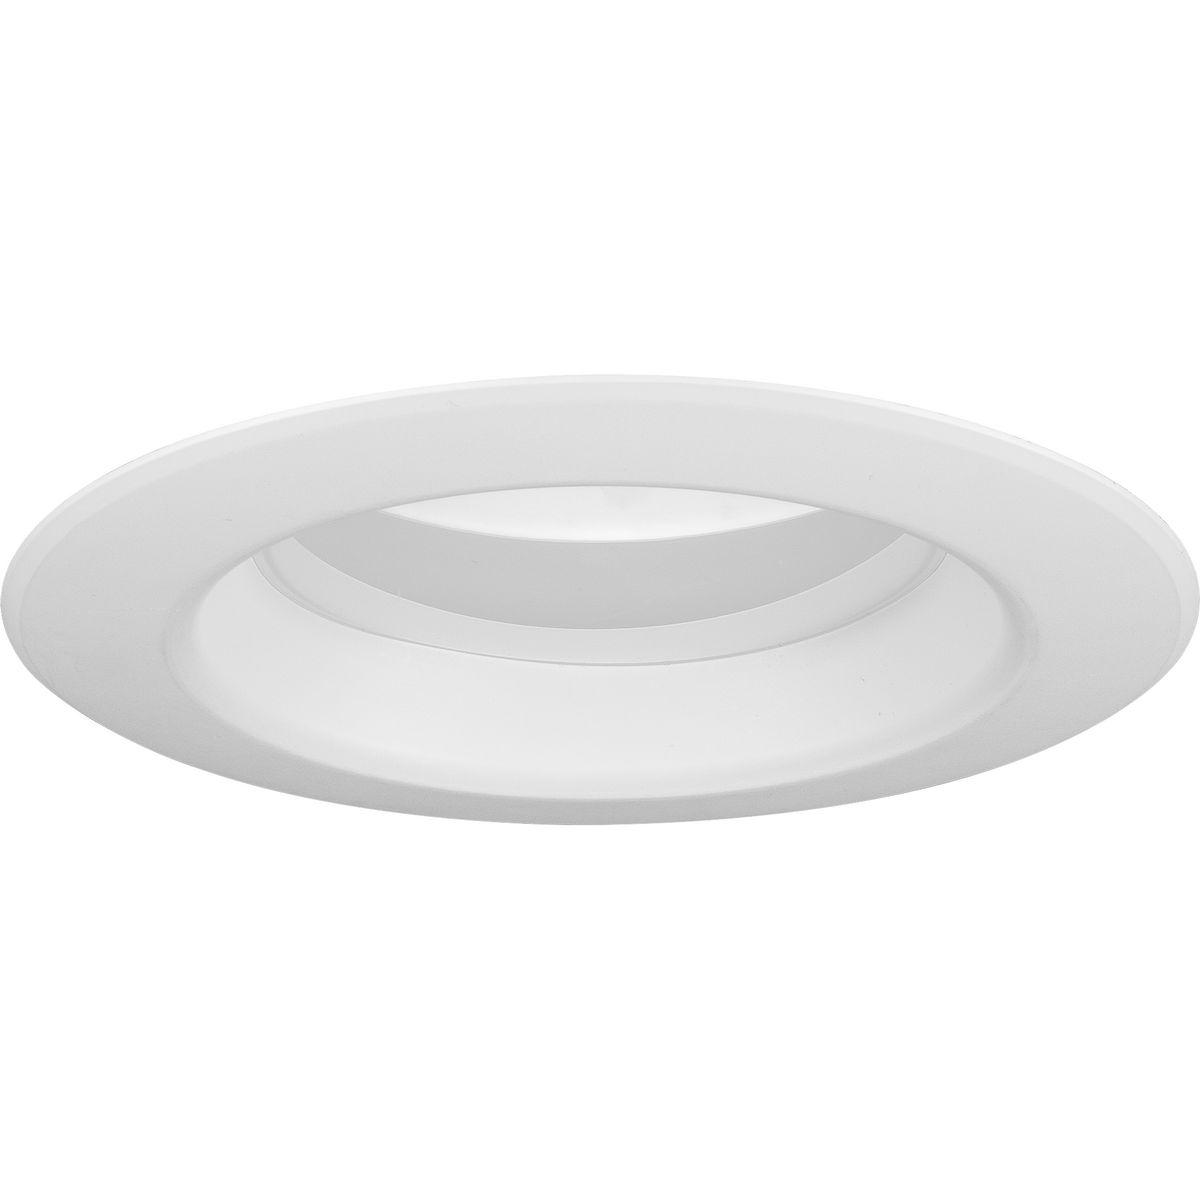 Hubbell P800002-028-30 Elevate any room's design with the Intrinsic Collection 1-Light Satin White Modern Recessed LED Downlight. The smooth trim ring is coated in a crisp satin white finish. The integrated LED emits general ambient lighting. The non-metallic construction is a 